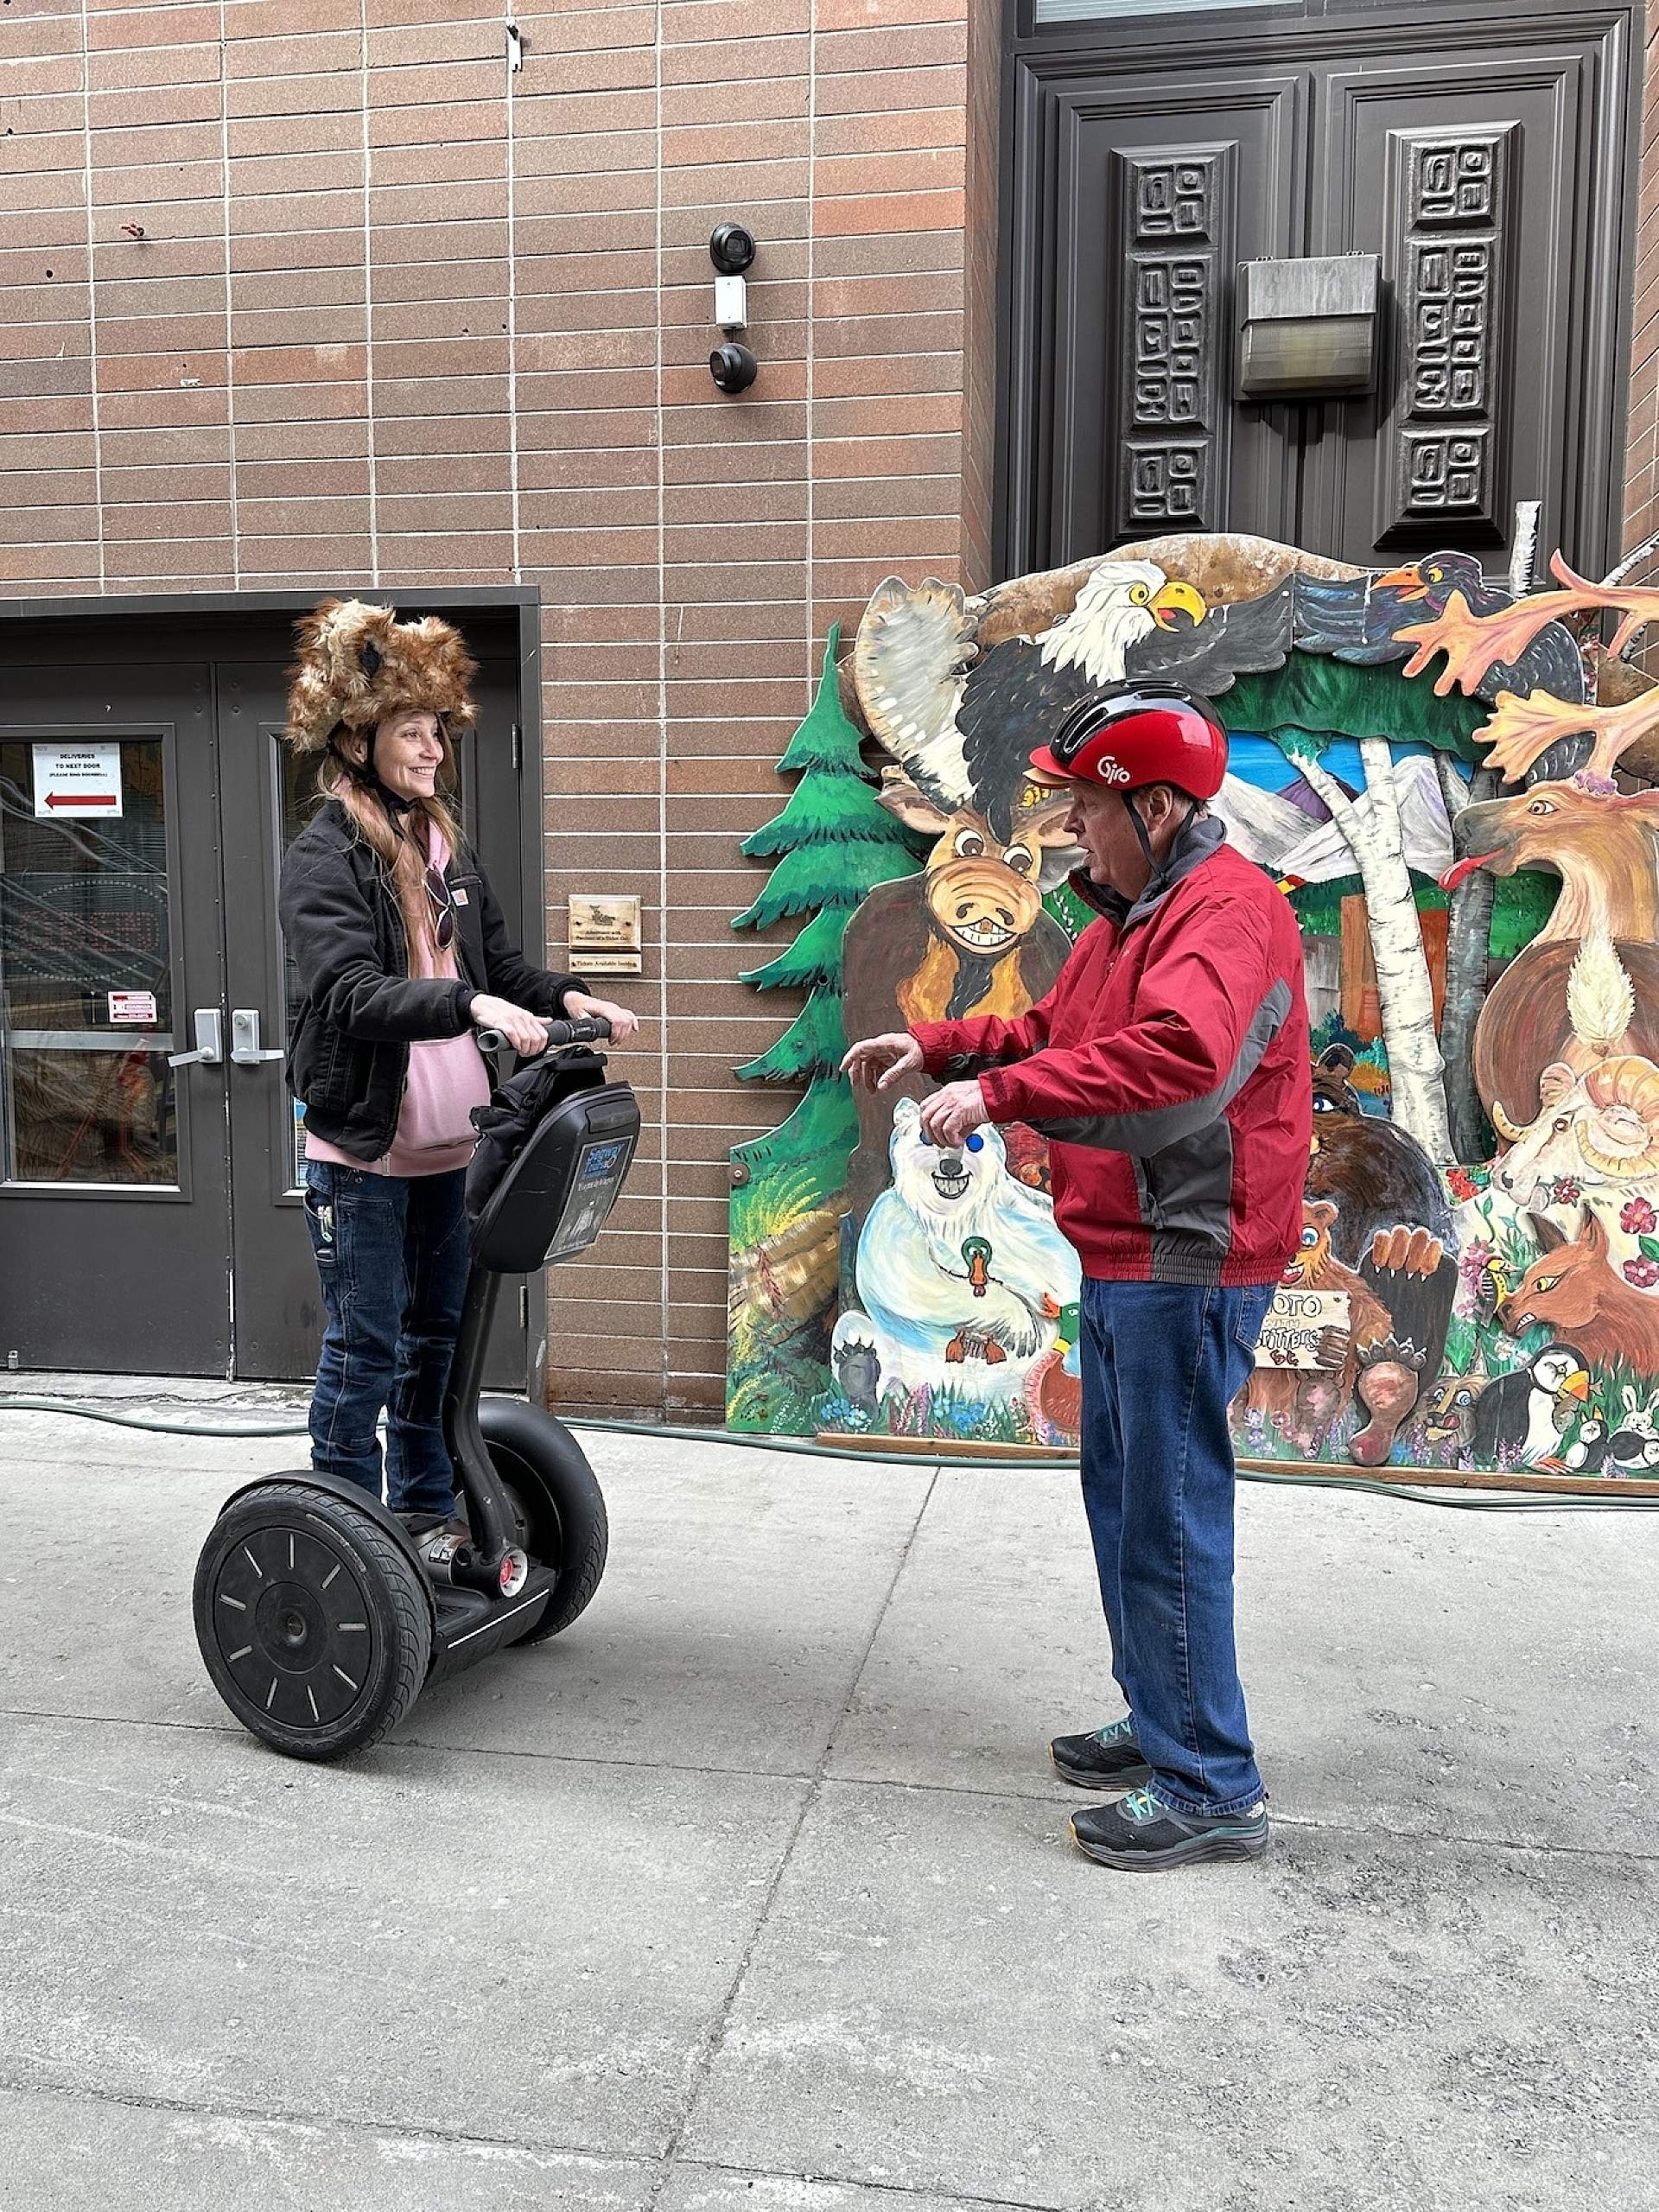 We get an introductory overview of how to ride a Segway before our tour in Anchorage.